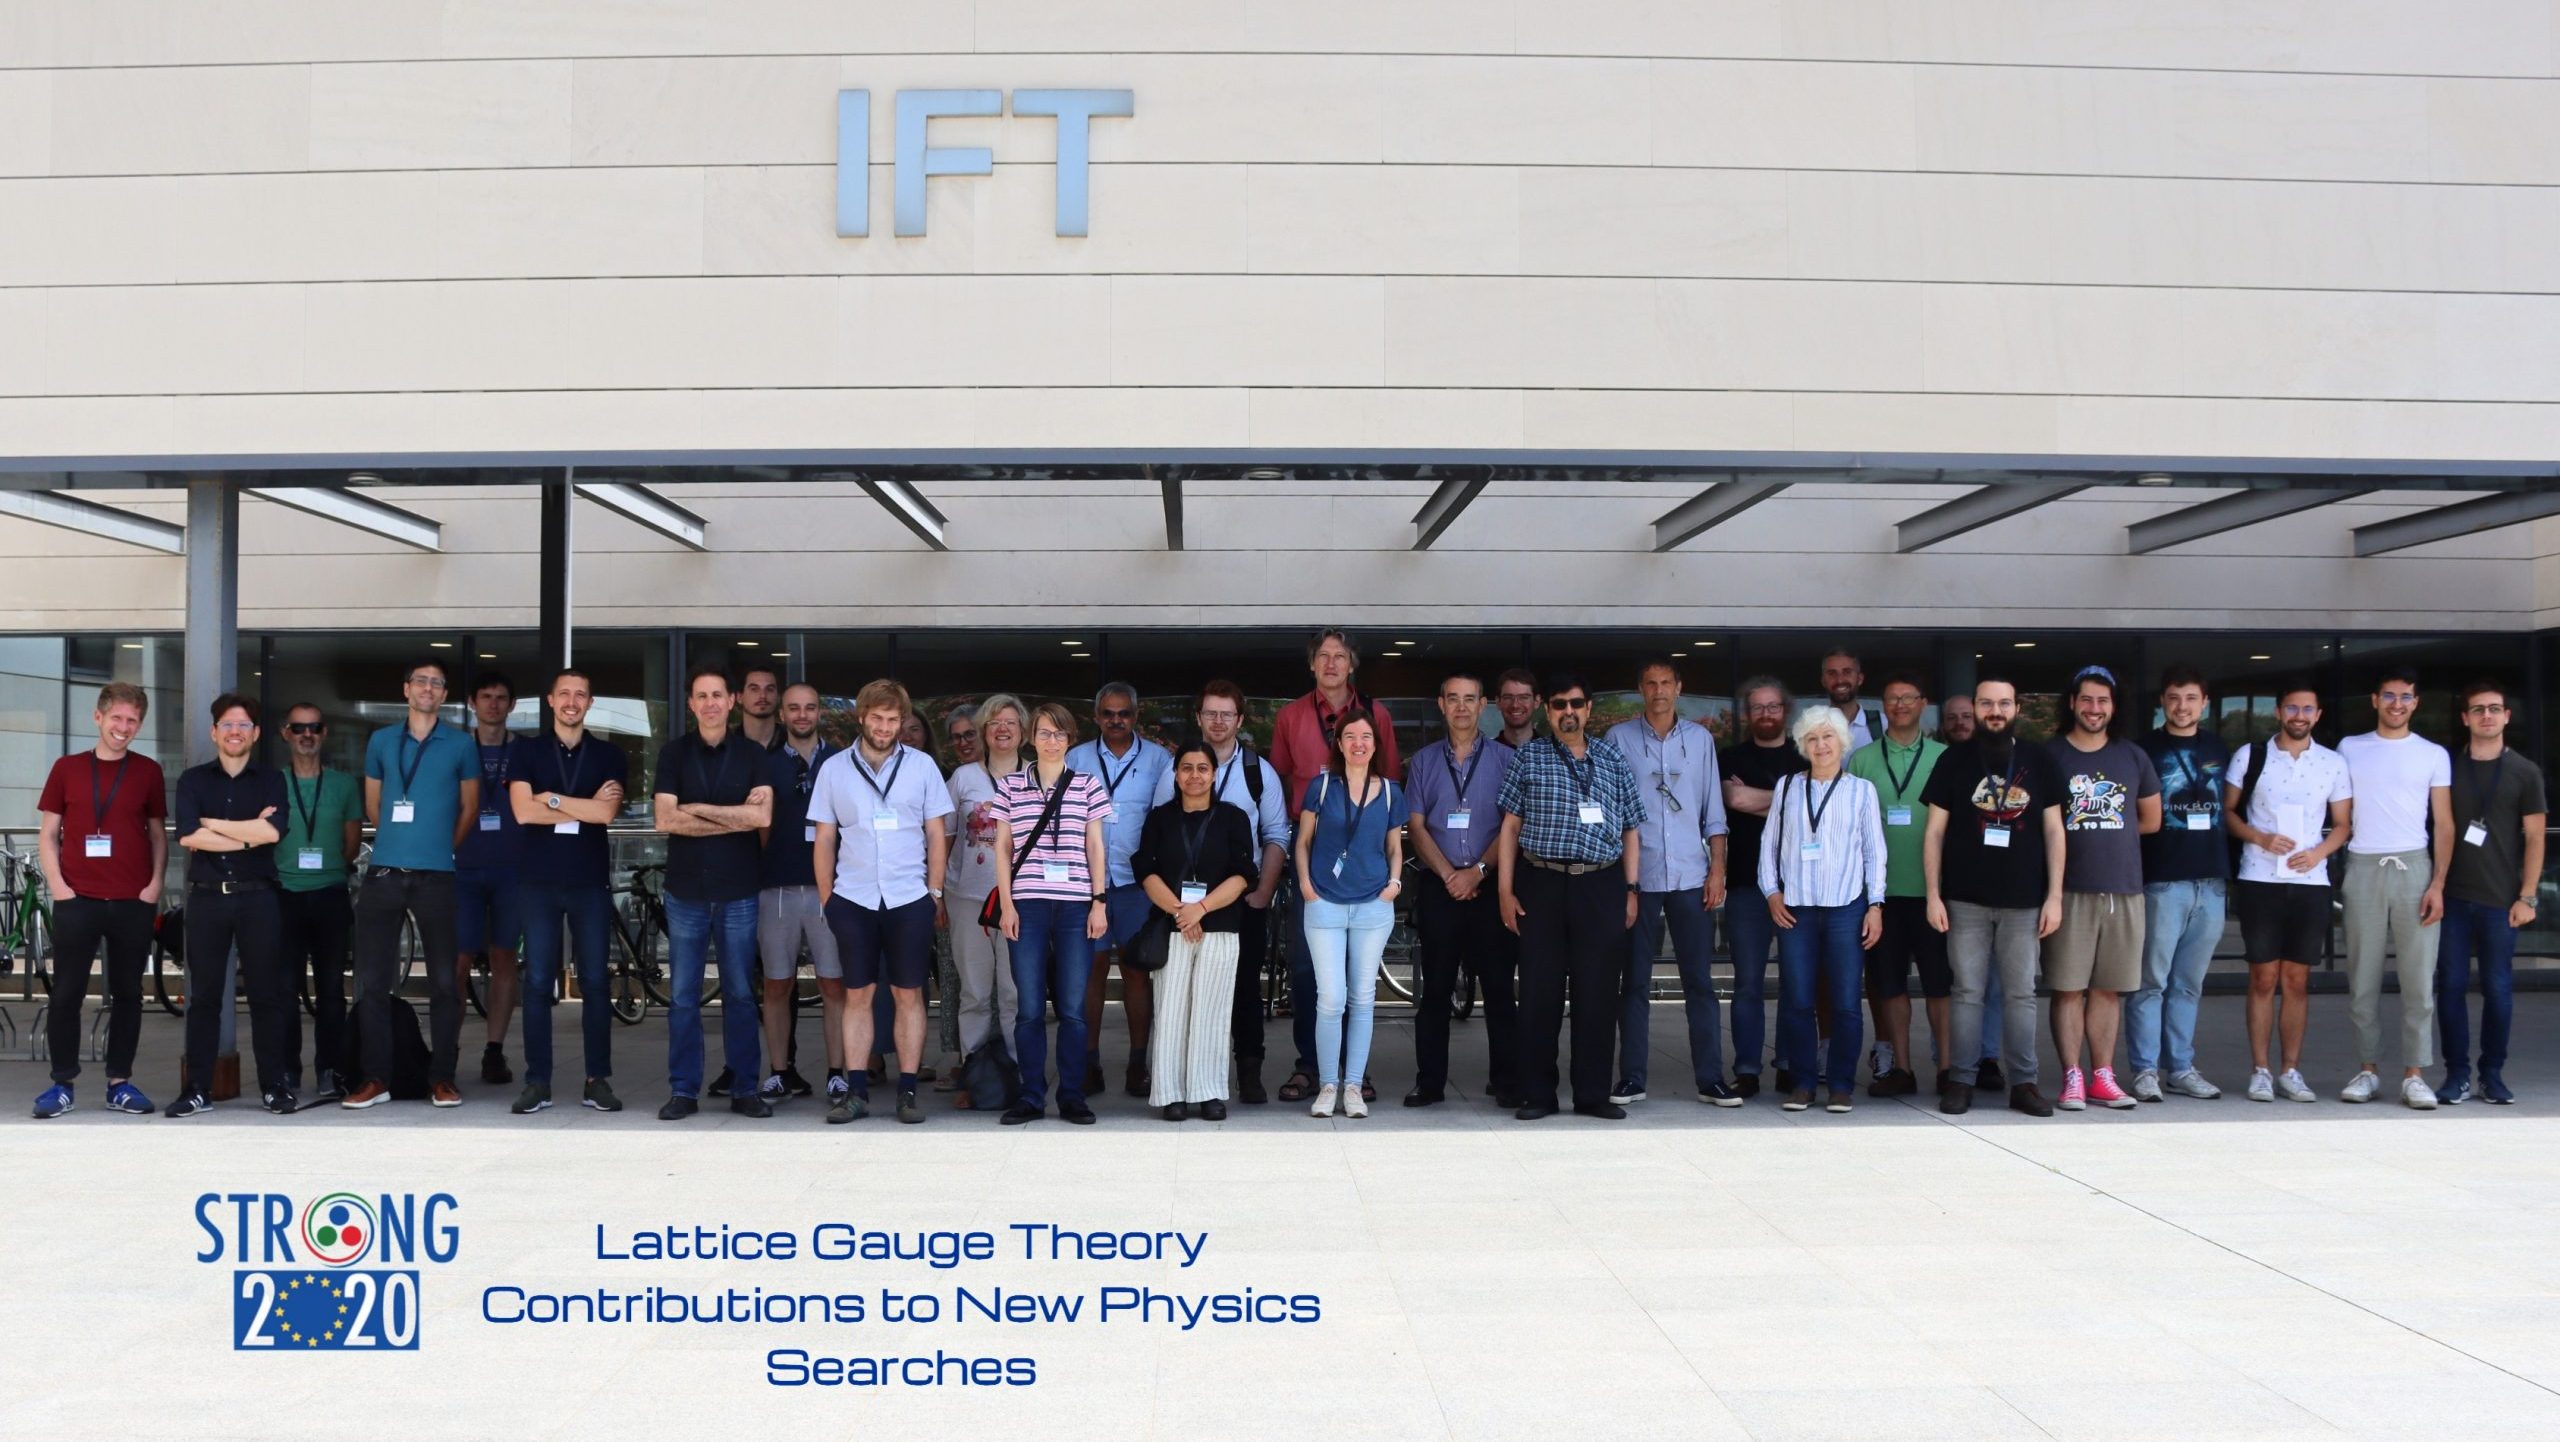 Lattice Gauge Theory Contributions to New Physics Searches